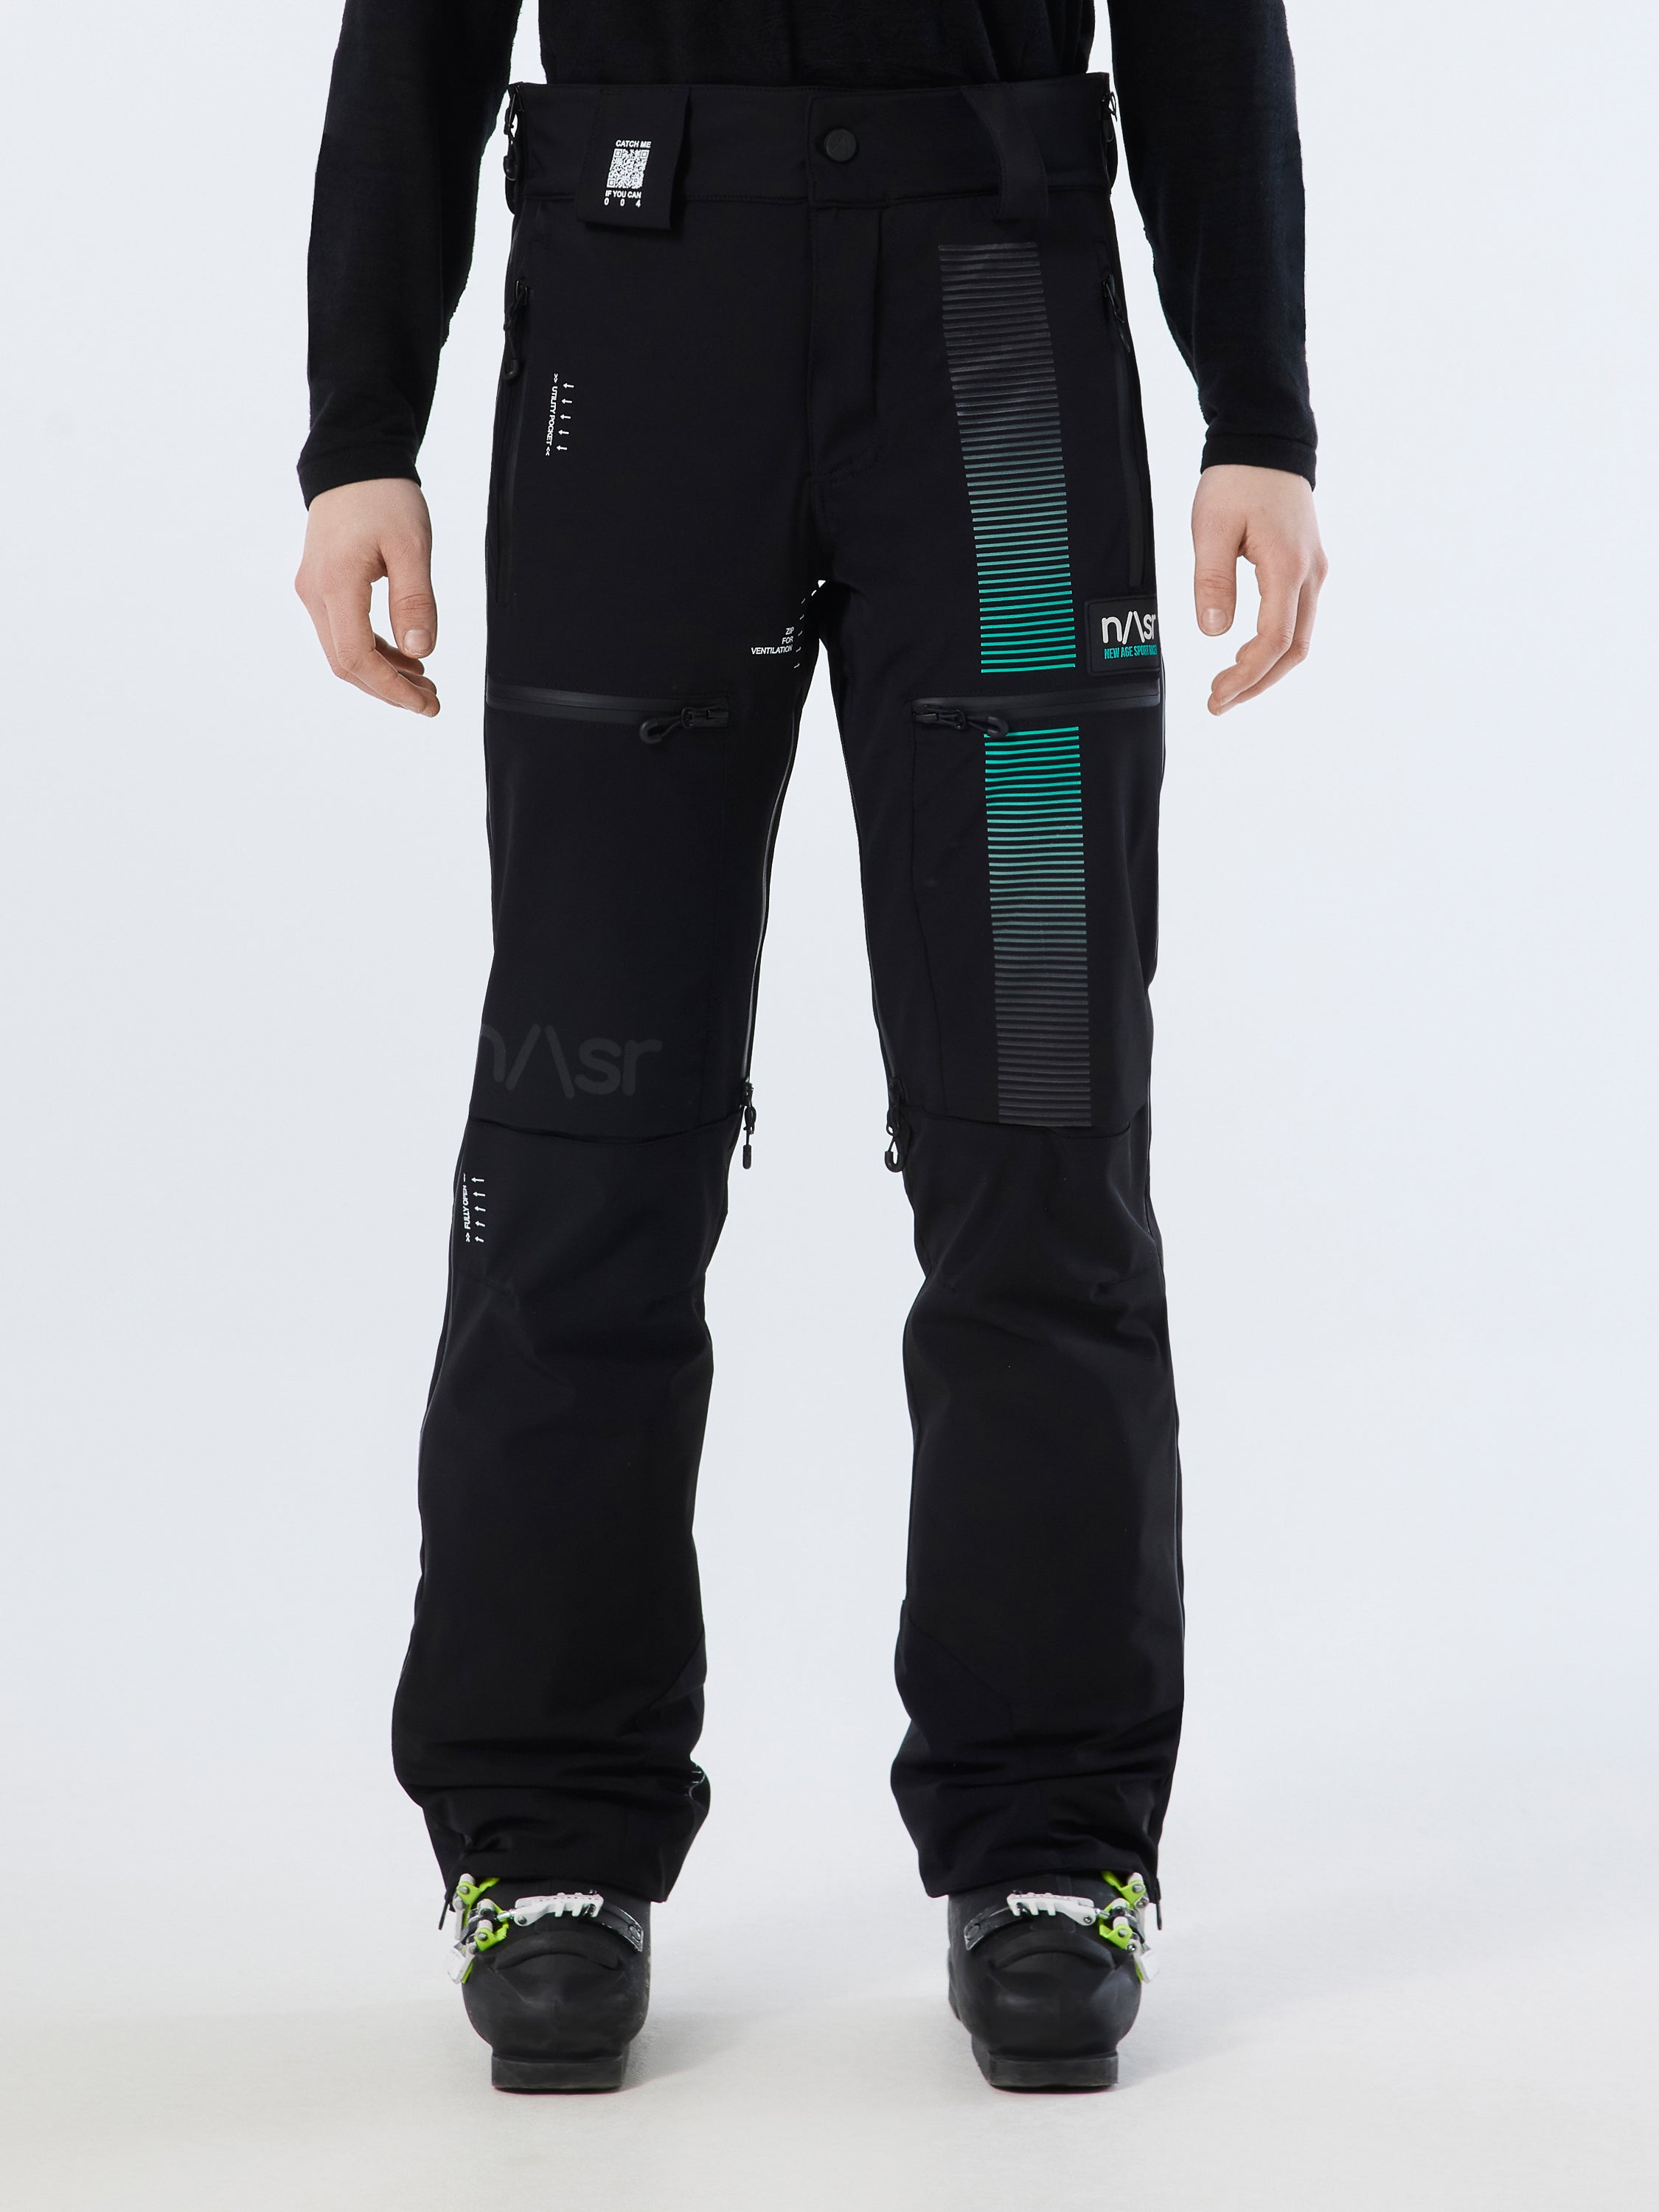 004 INSULATED PANT WOMAN